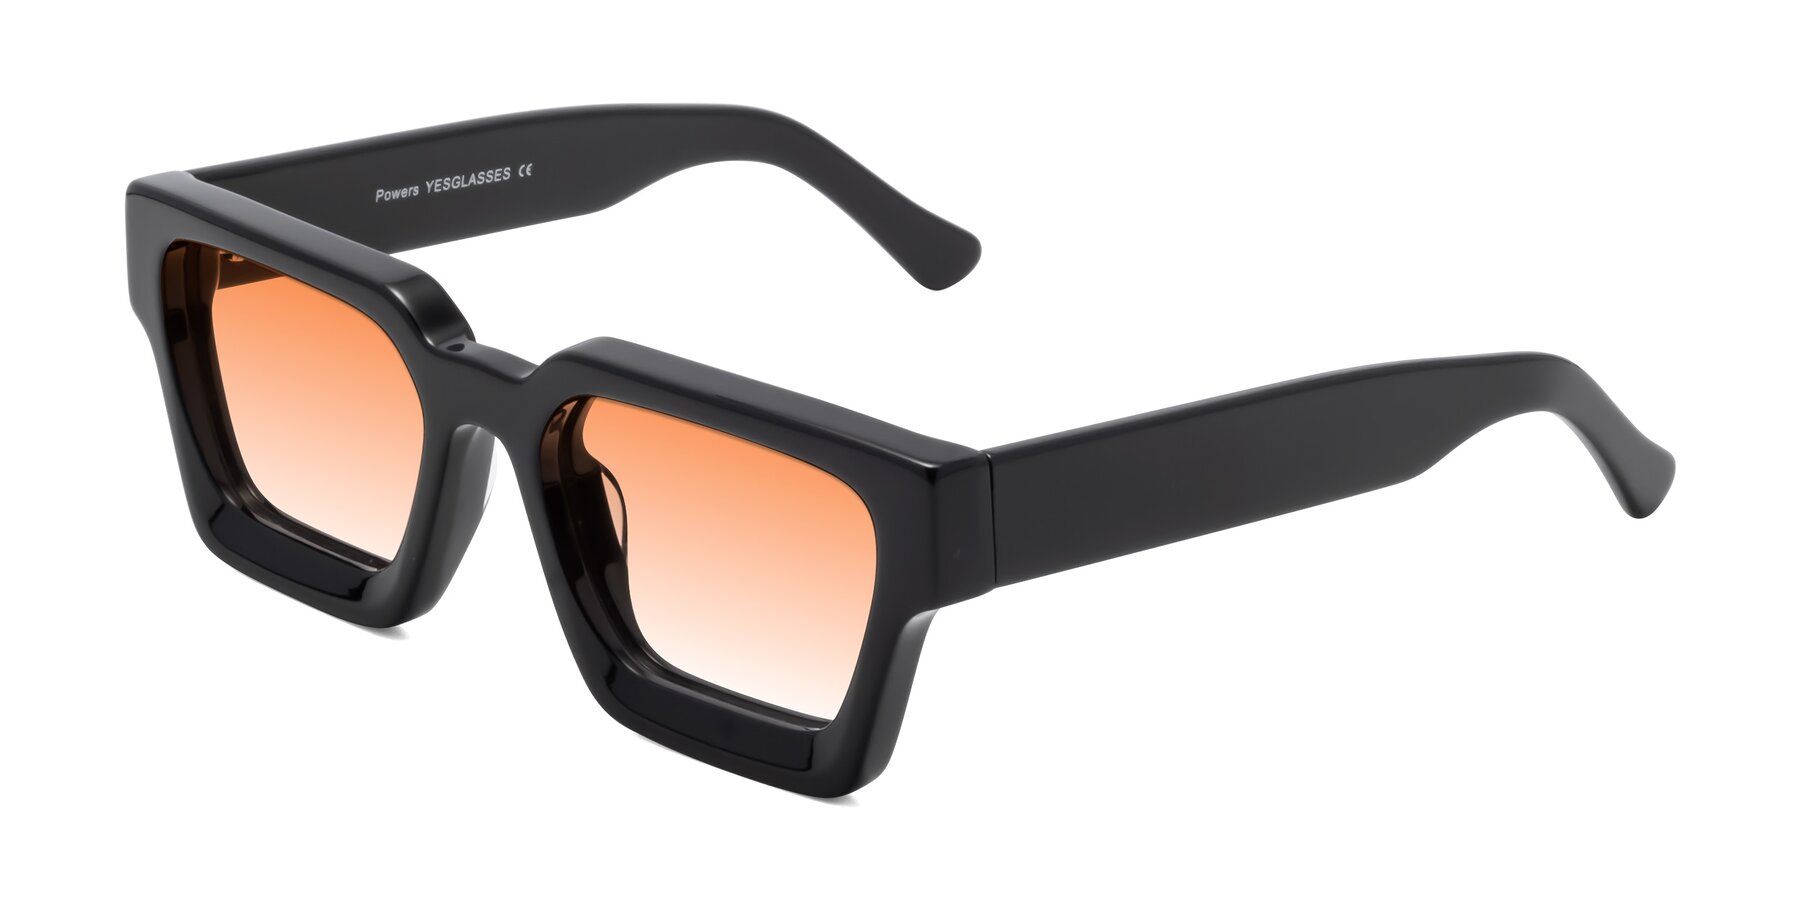 Angle of Powers in Black with Orange Gradient Lenses